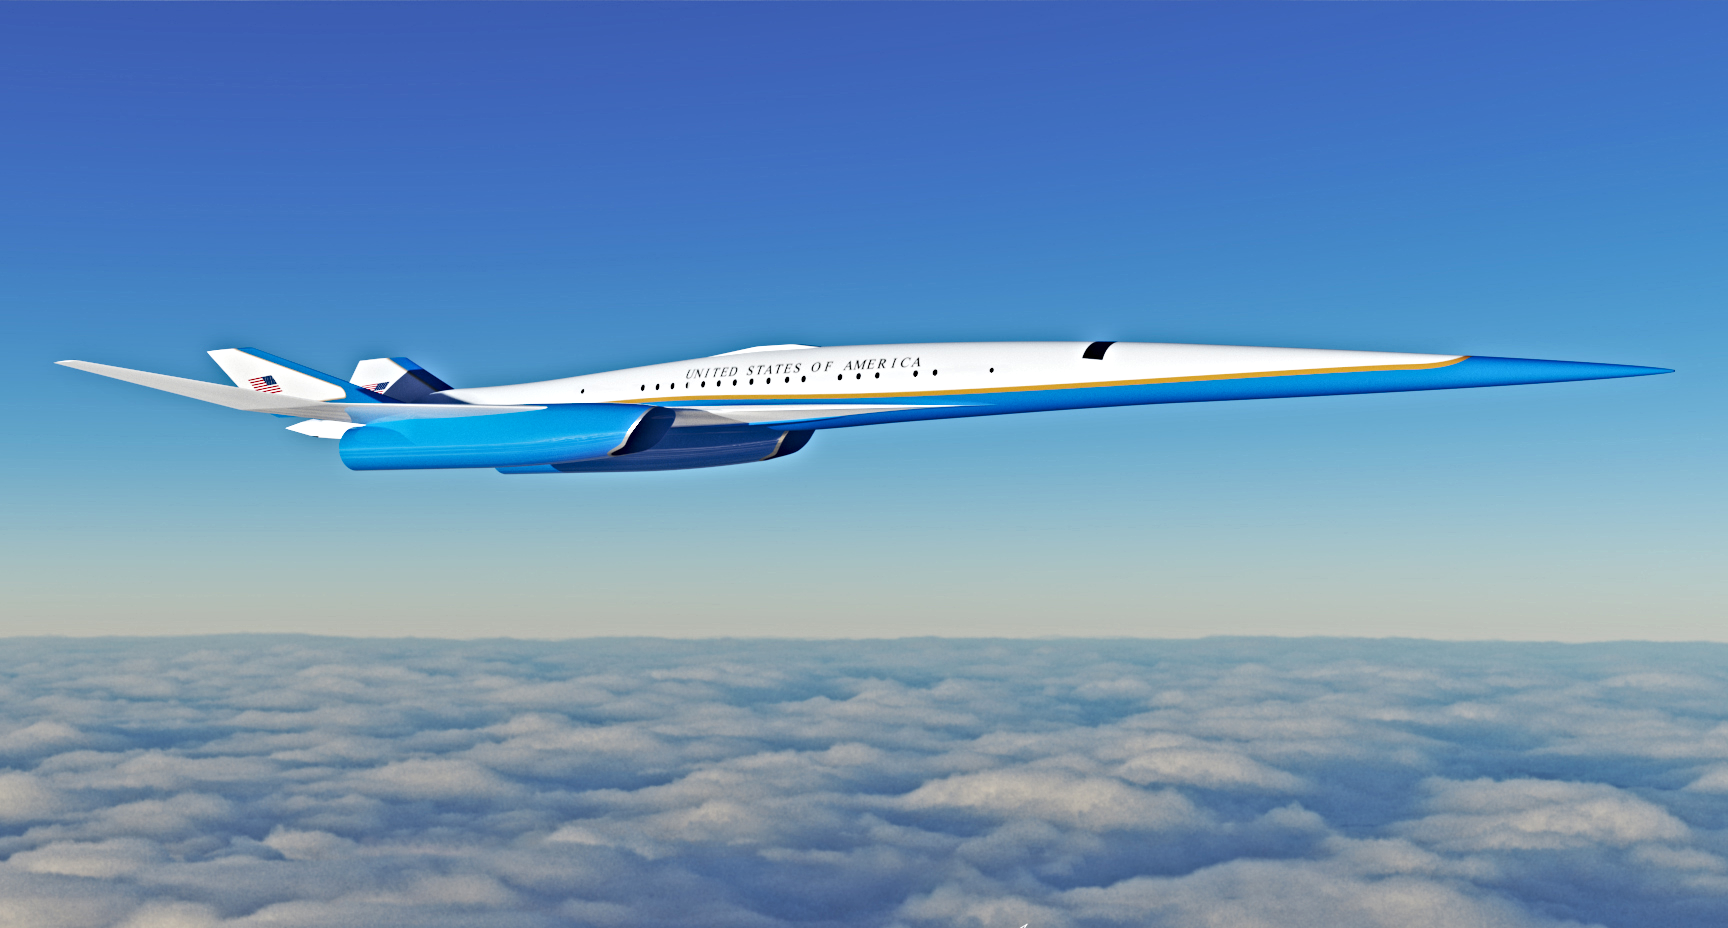 Supersonic-Air-Force-One-2030s